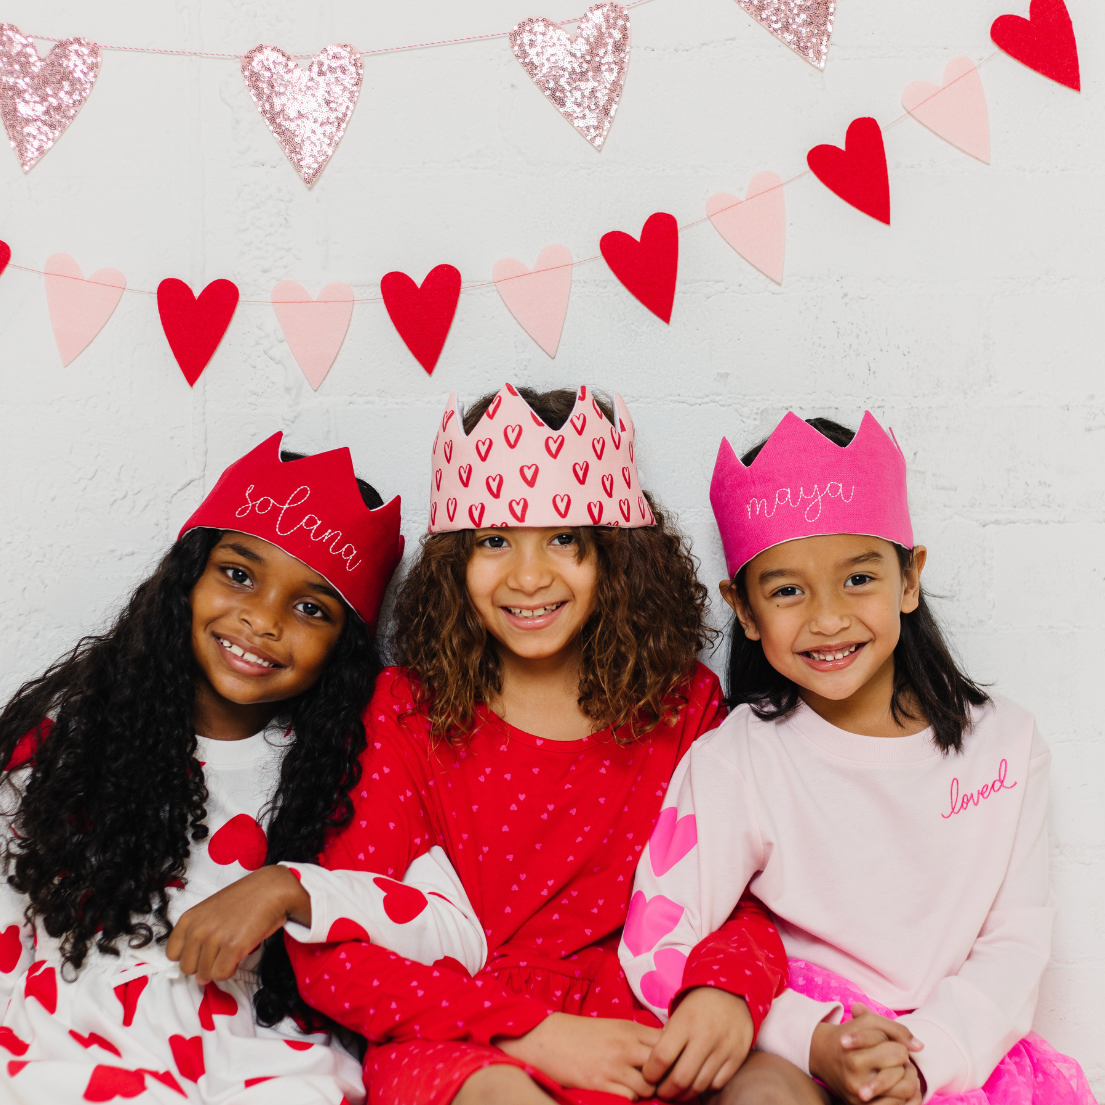 Red Crown | "Great quality and so cute!"